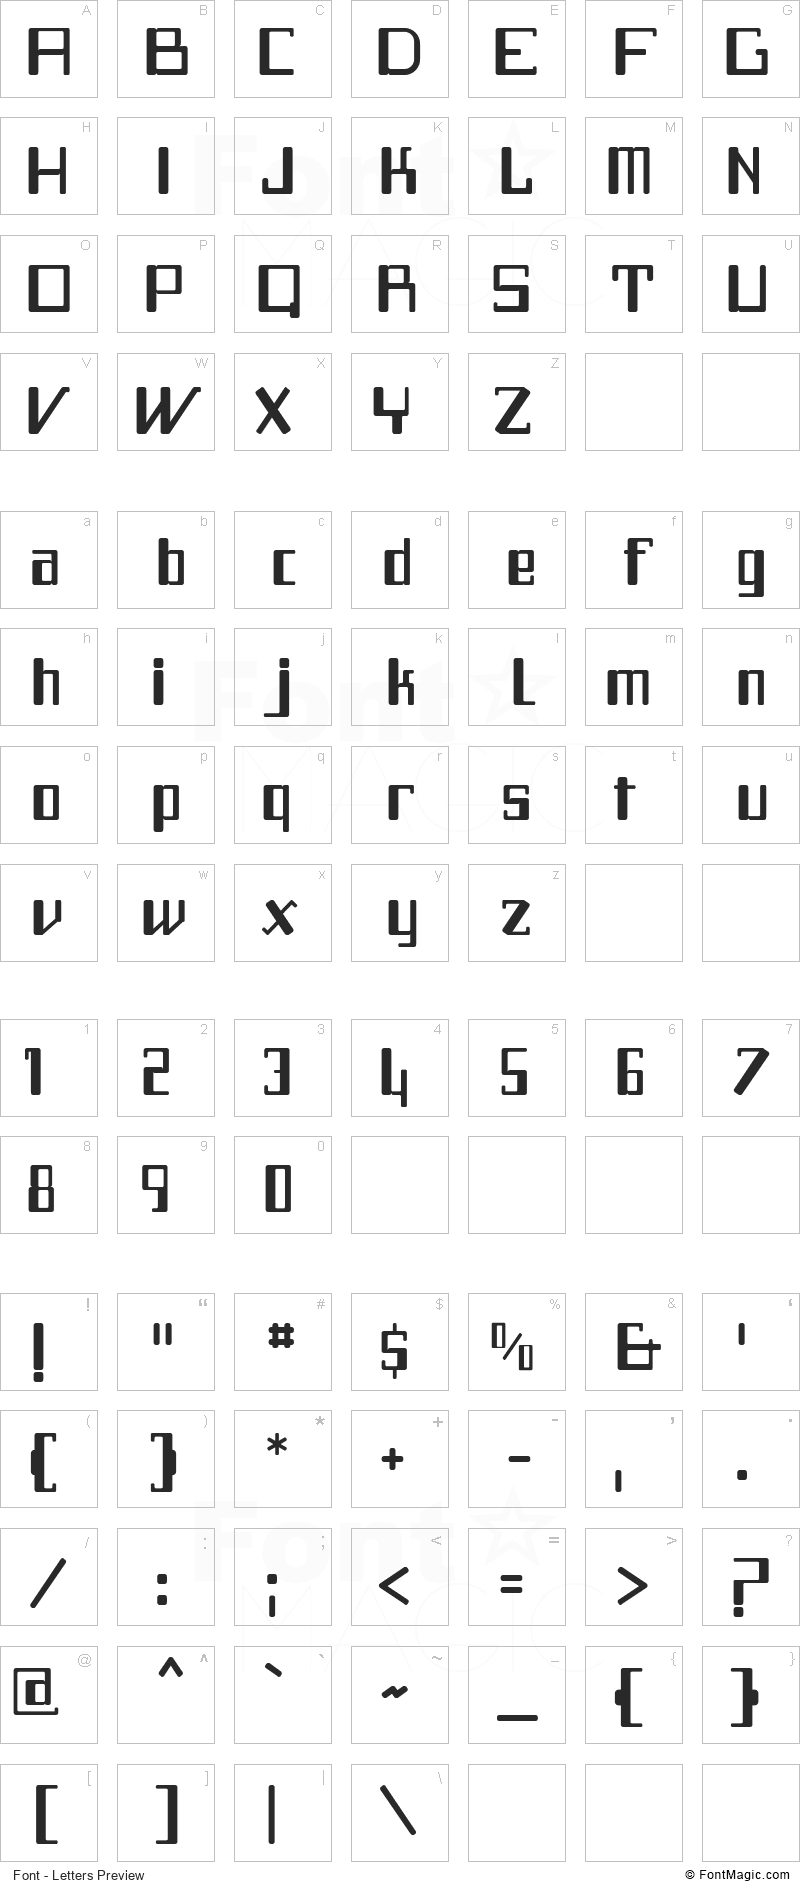 F2 Tecnocrática Font - All Latters Preview Chart